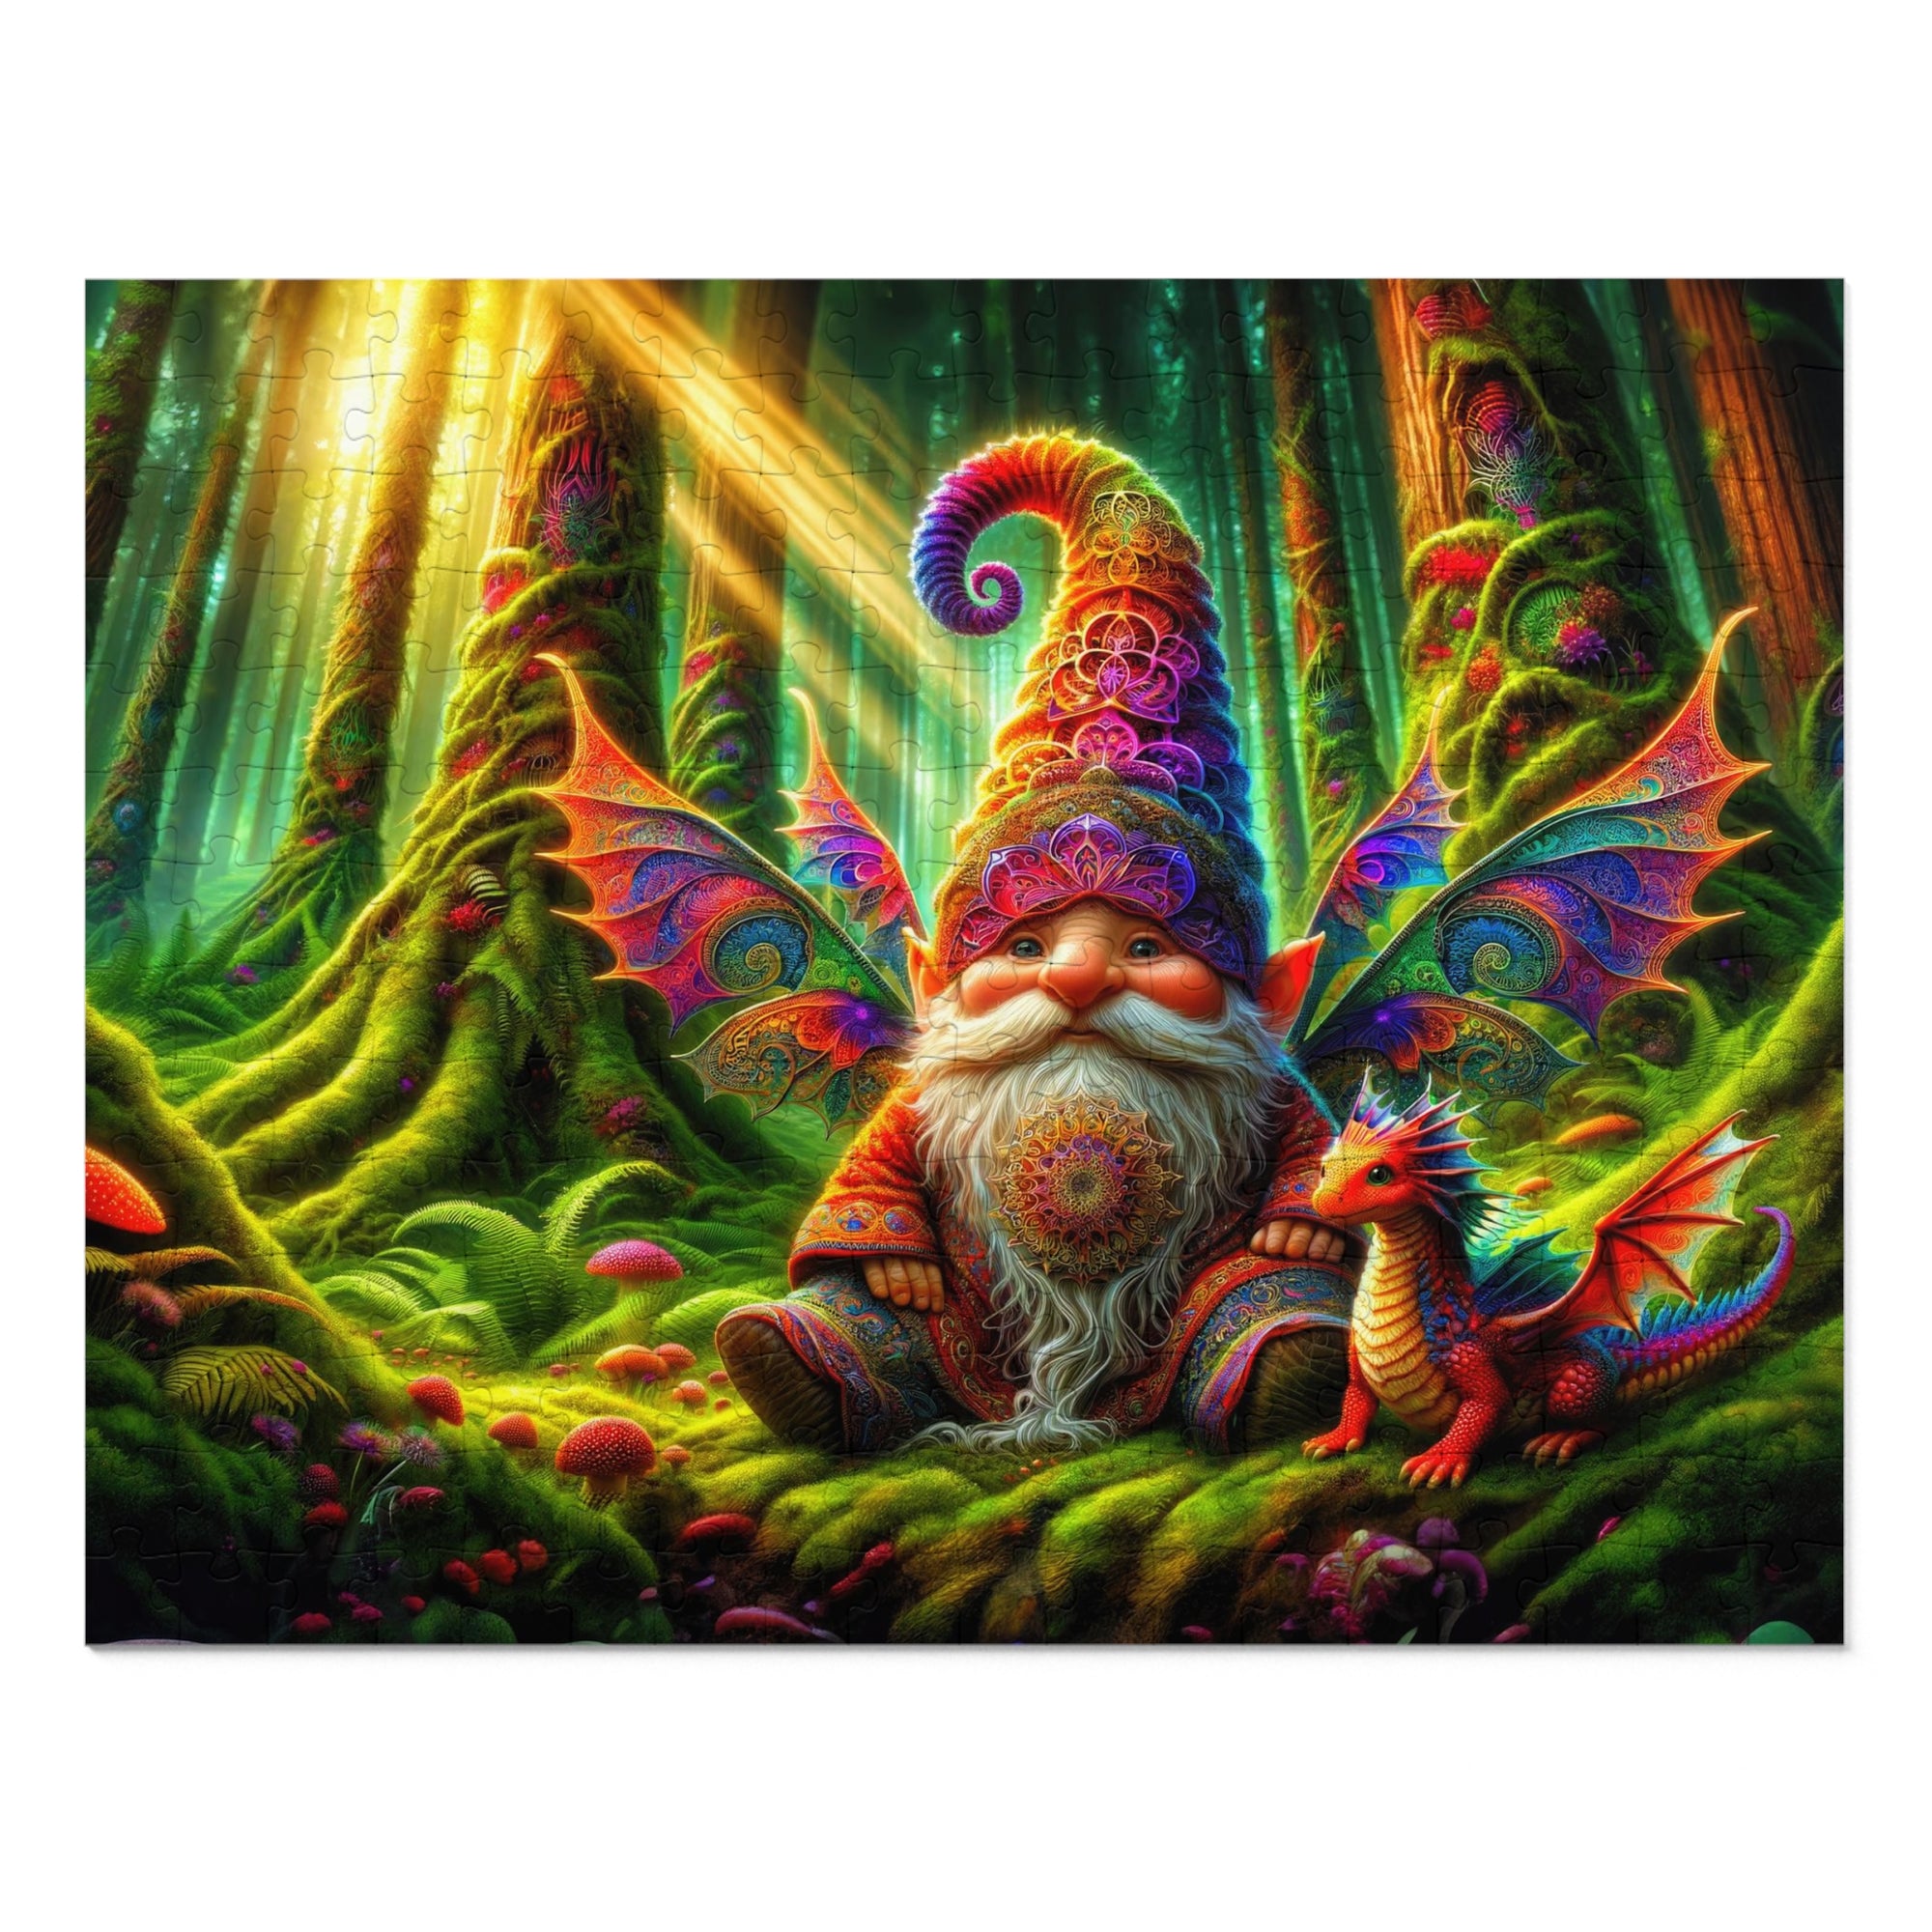 Whispers of the Woods Jigsaw Puzzle